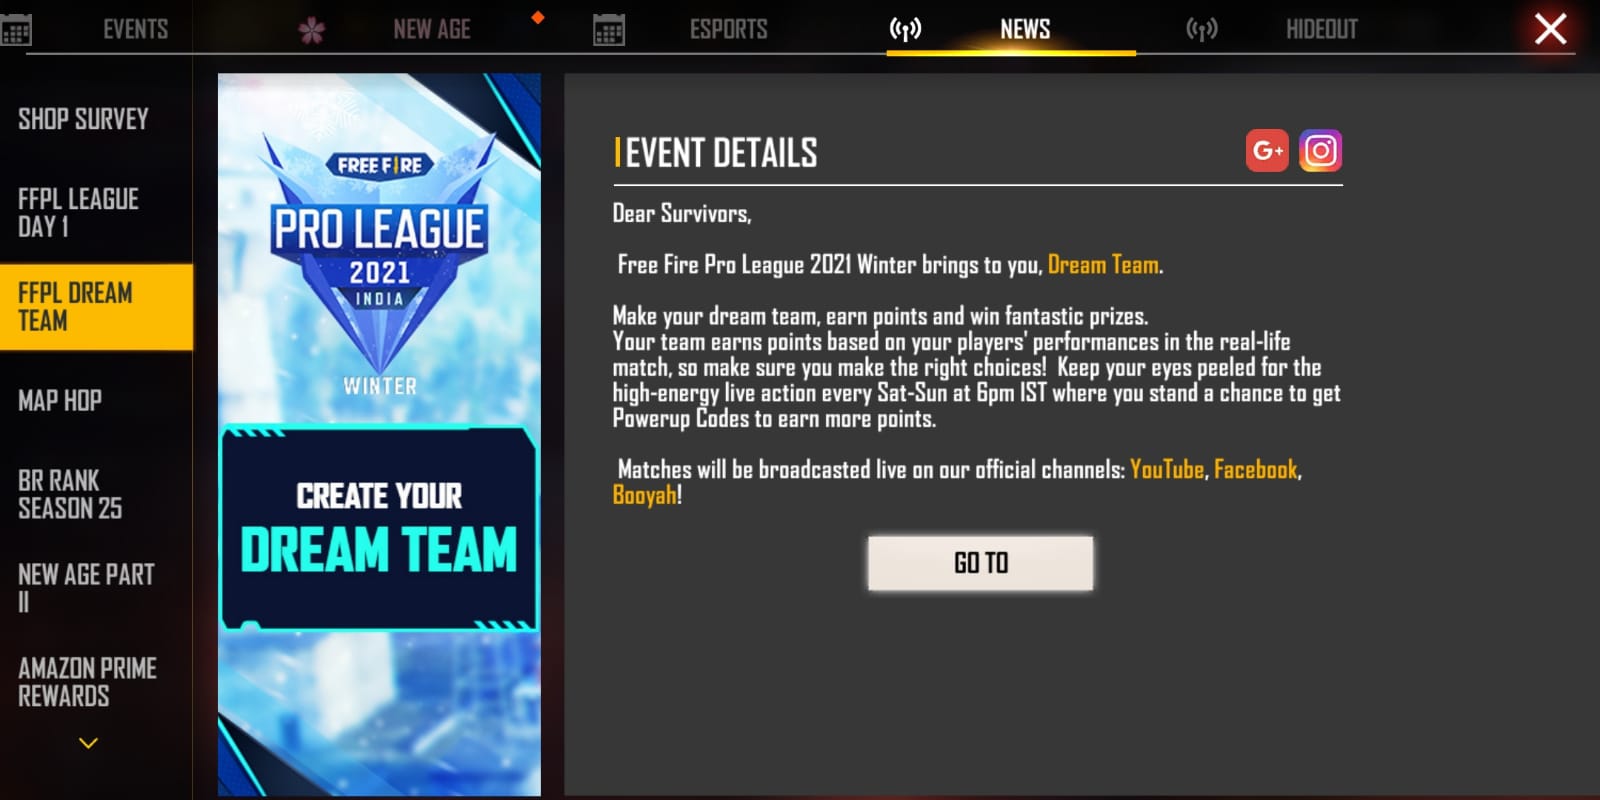 FFPL Dream Team Event: Check How to create a team and play the Free Fire Pro League 2021 Winter Dream Team Event All you need to know